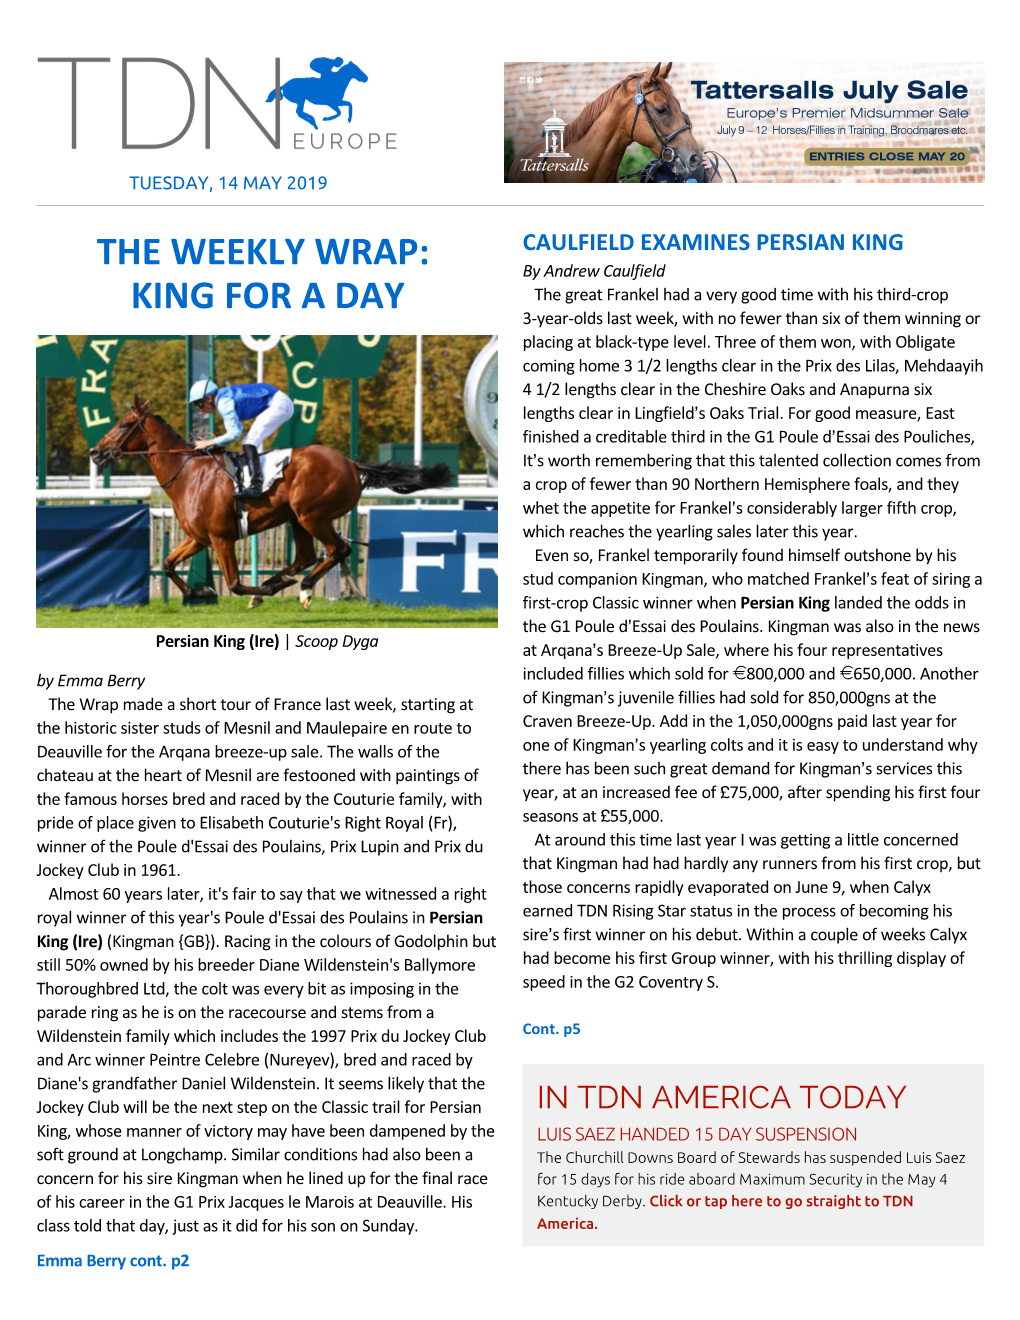 The Weekly Wrap: King for A